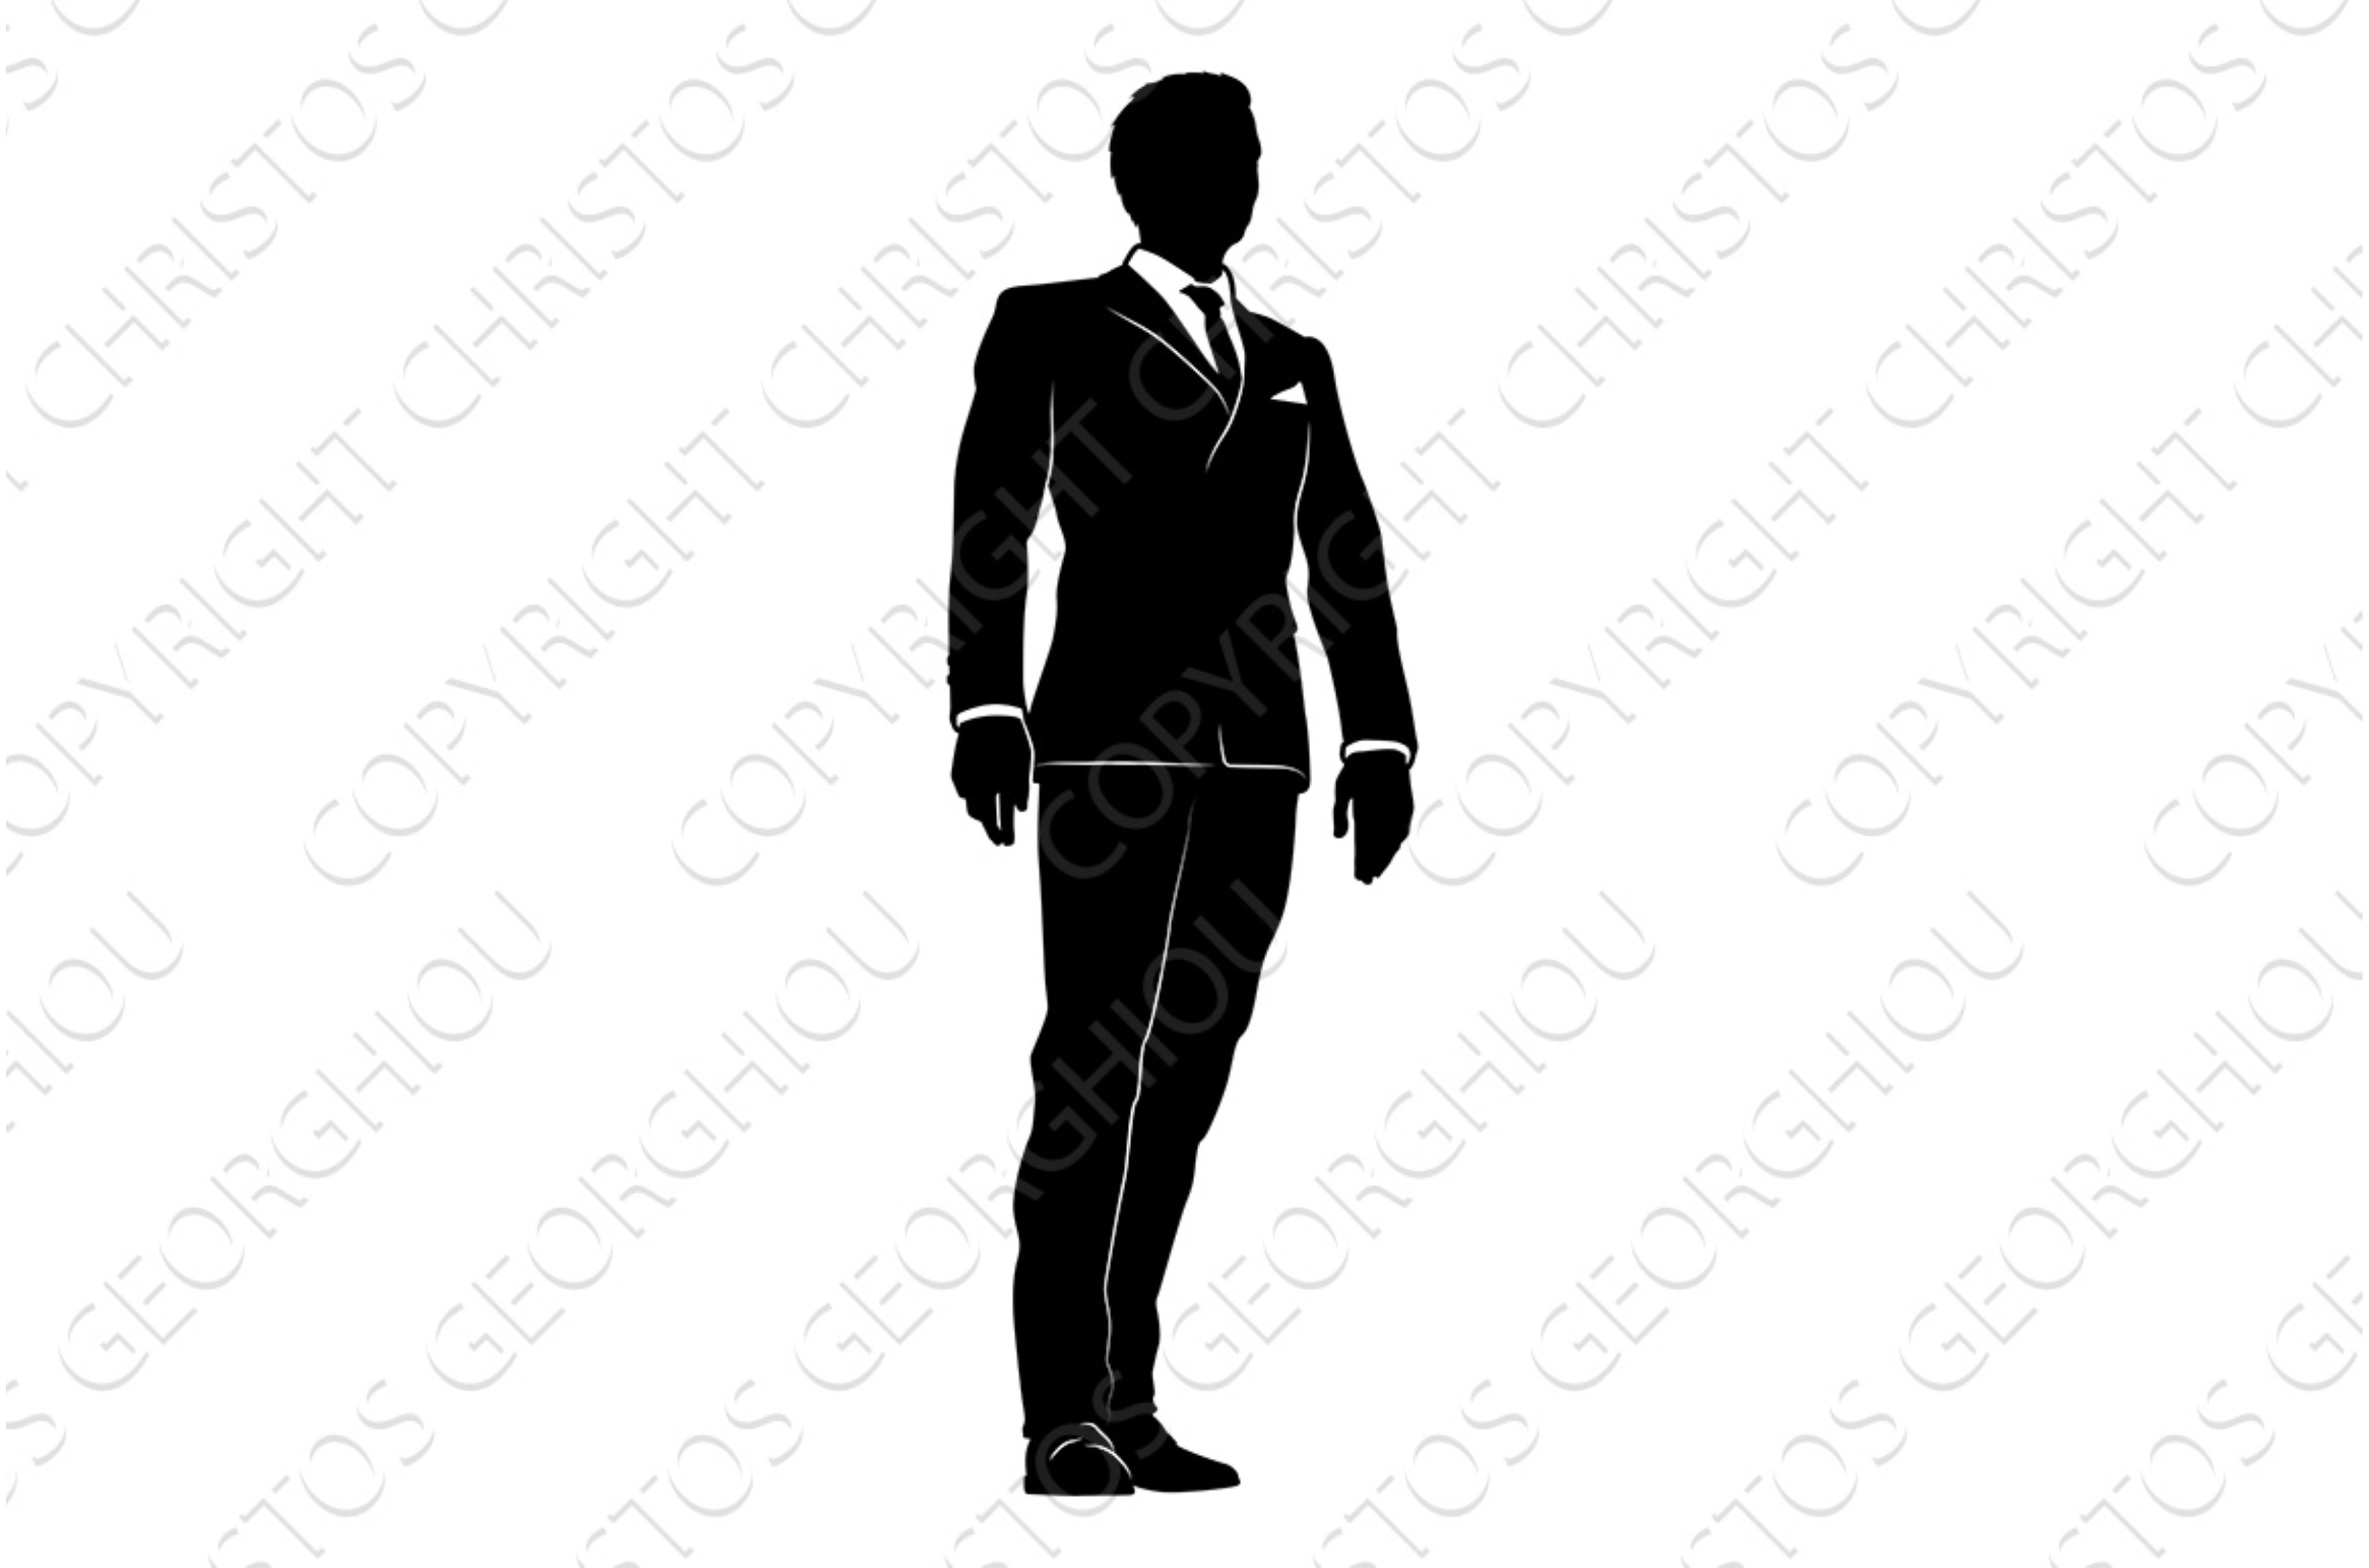 Business Man In Suit Silhouette cover image.